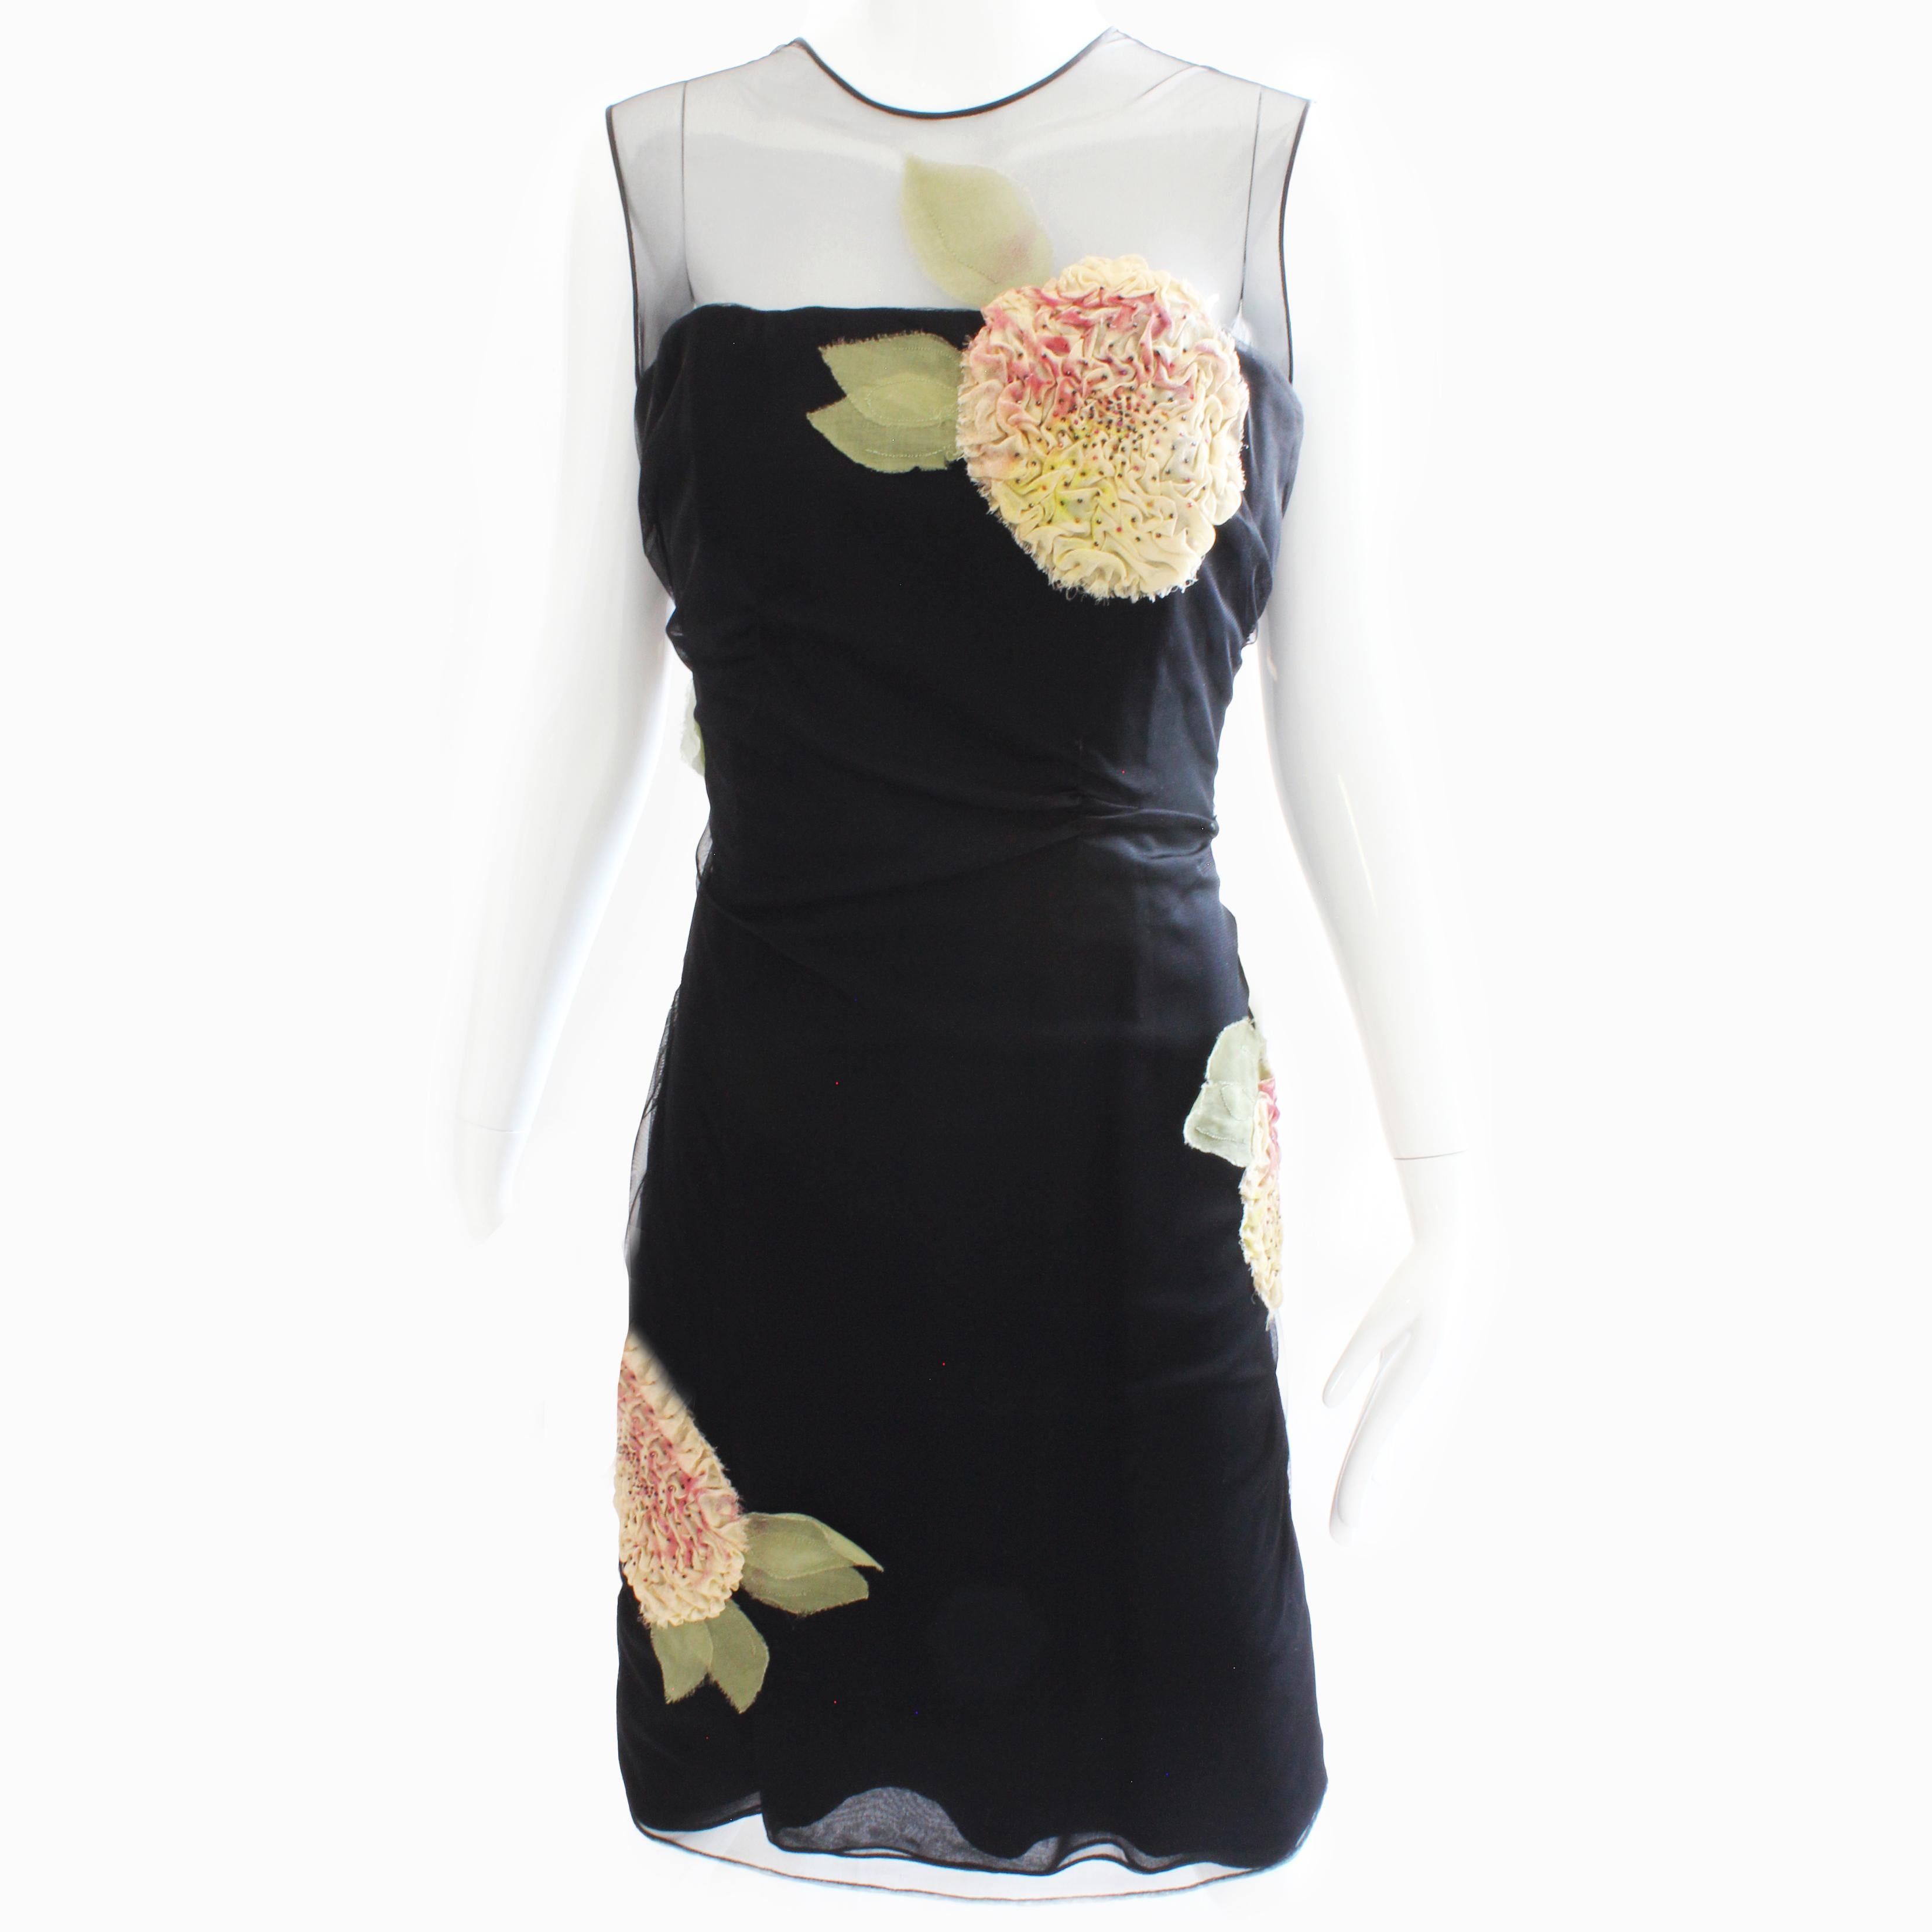 Authentic, preowned and vintage Bill Blass Black Cocktail Dress with sculptural floral appliqué, likely made in the late 70s. 

A chic little black dress with a twist! It features an inner corset made from black silk satin, which gives it great